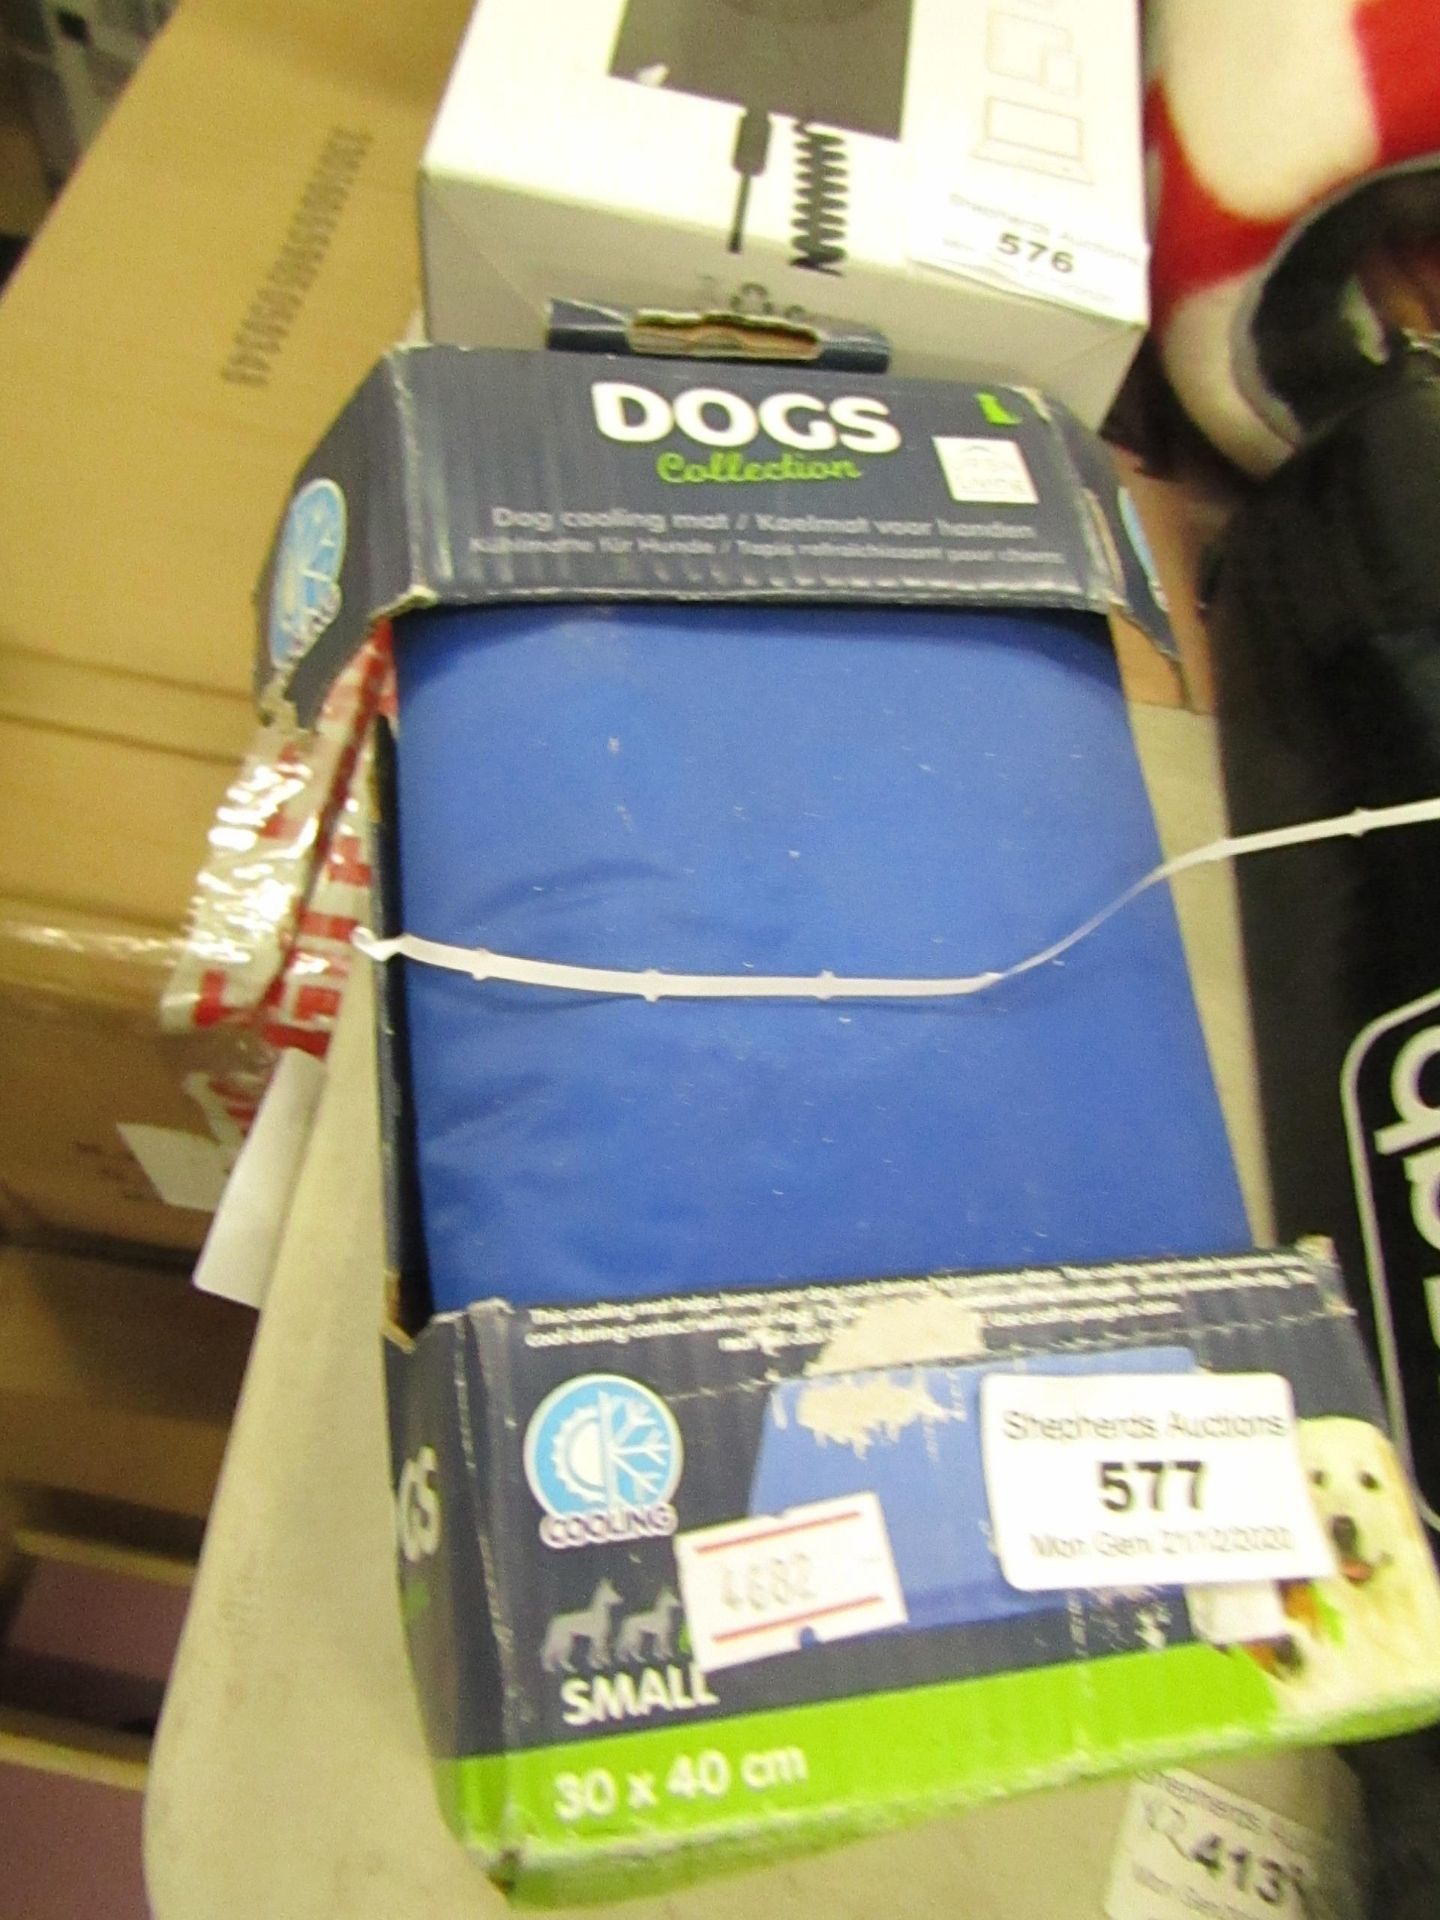 Dog Cooling mat - Packaging is damaged but item seems fine.